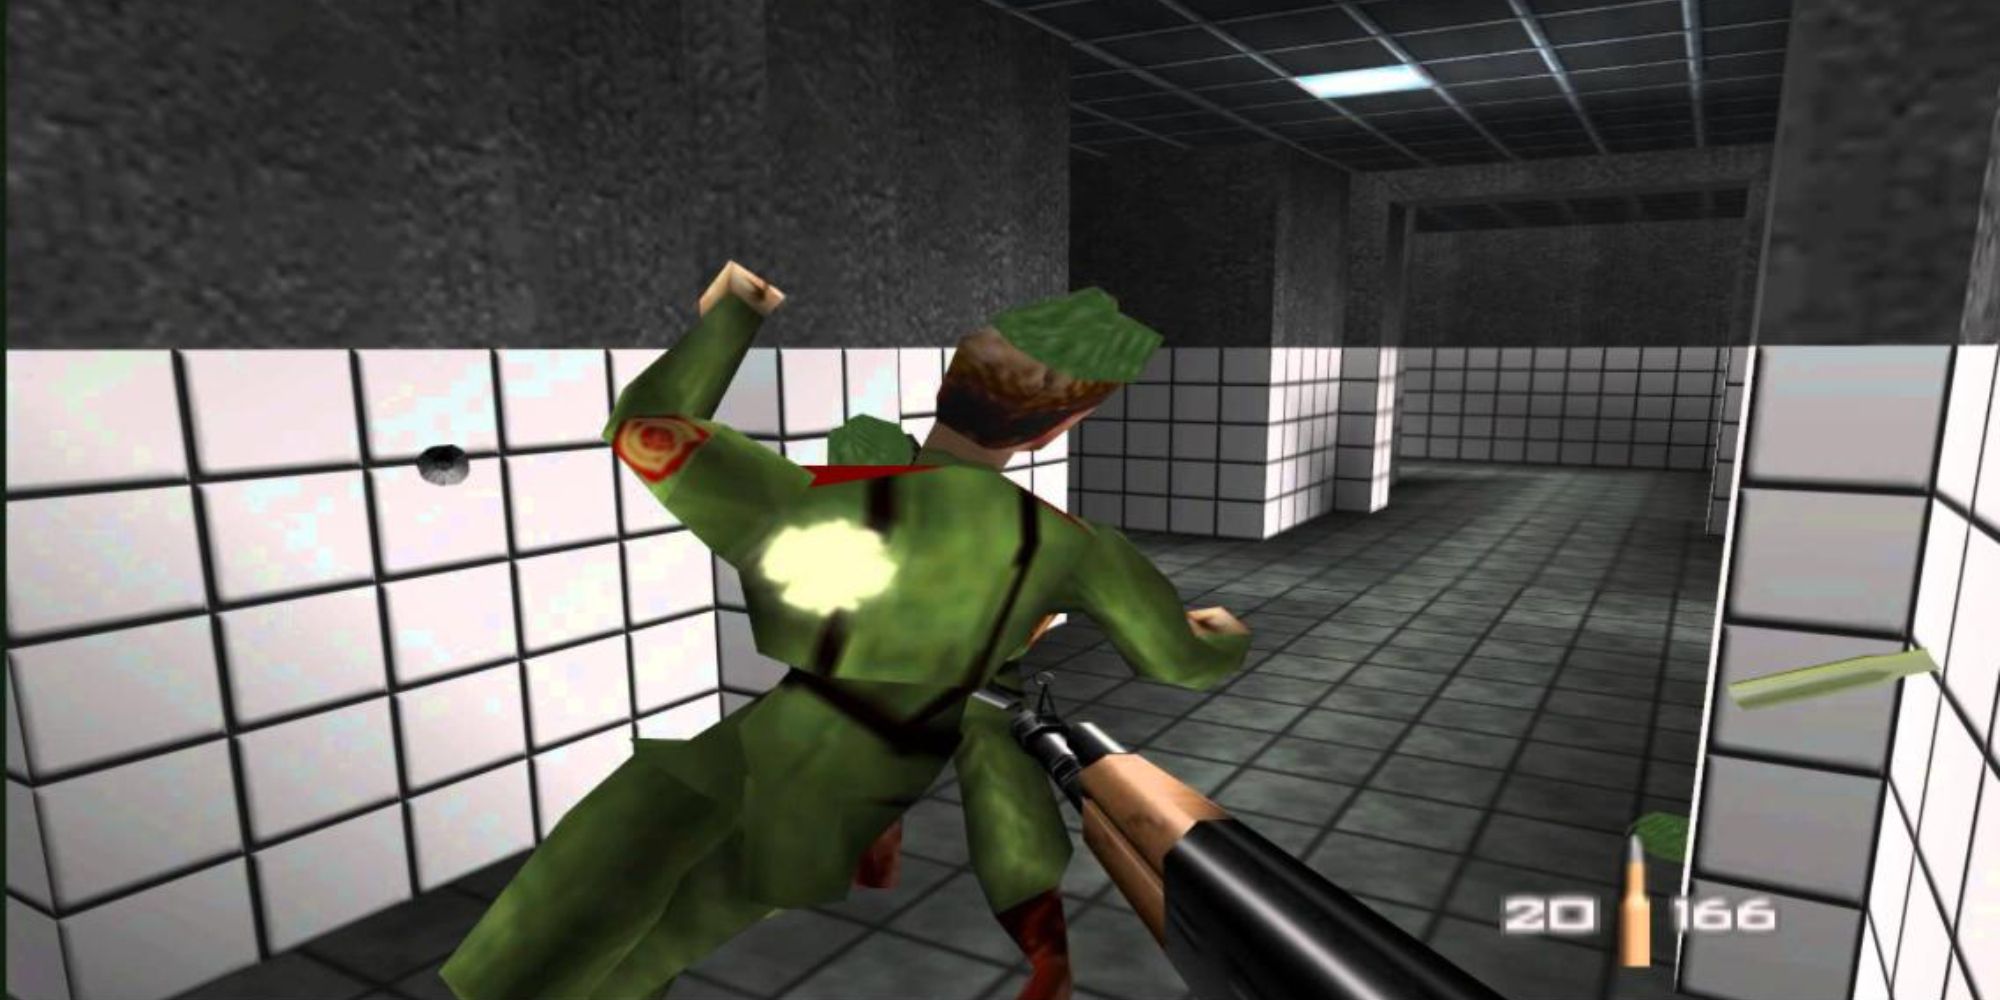 A player shooting at a guard in GoldenEye 007